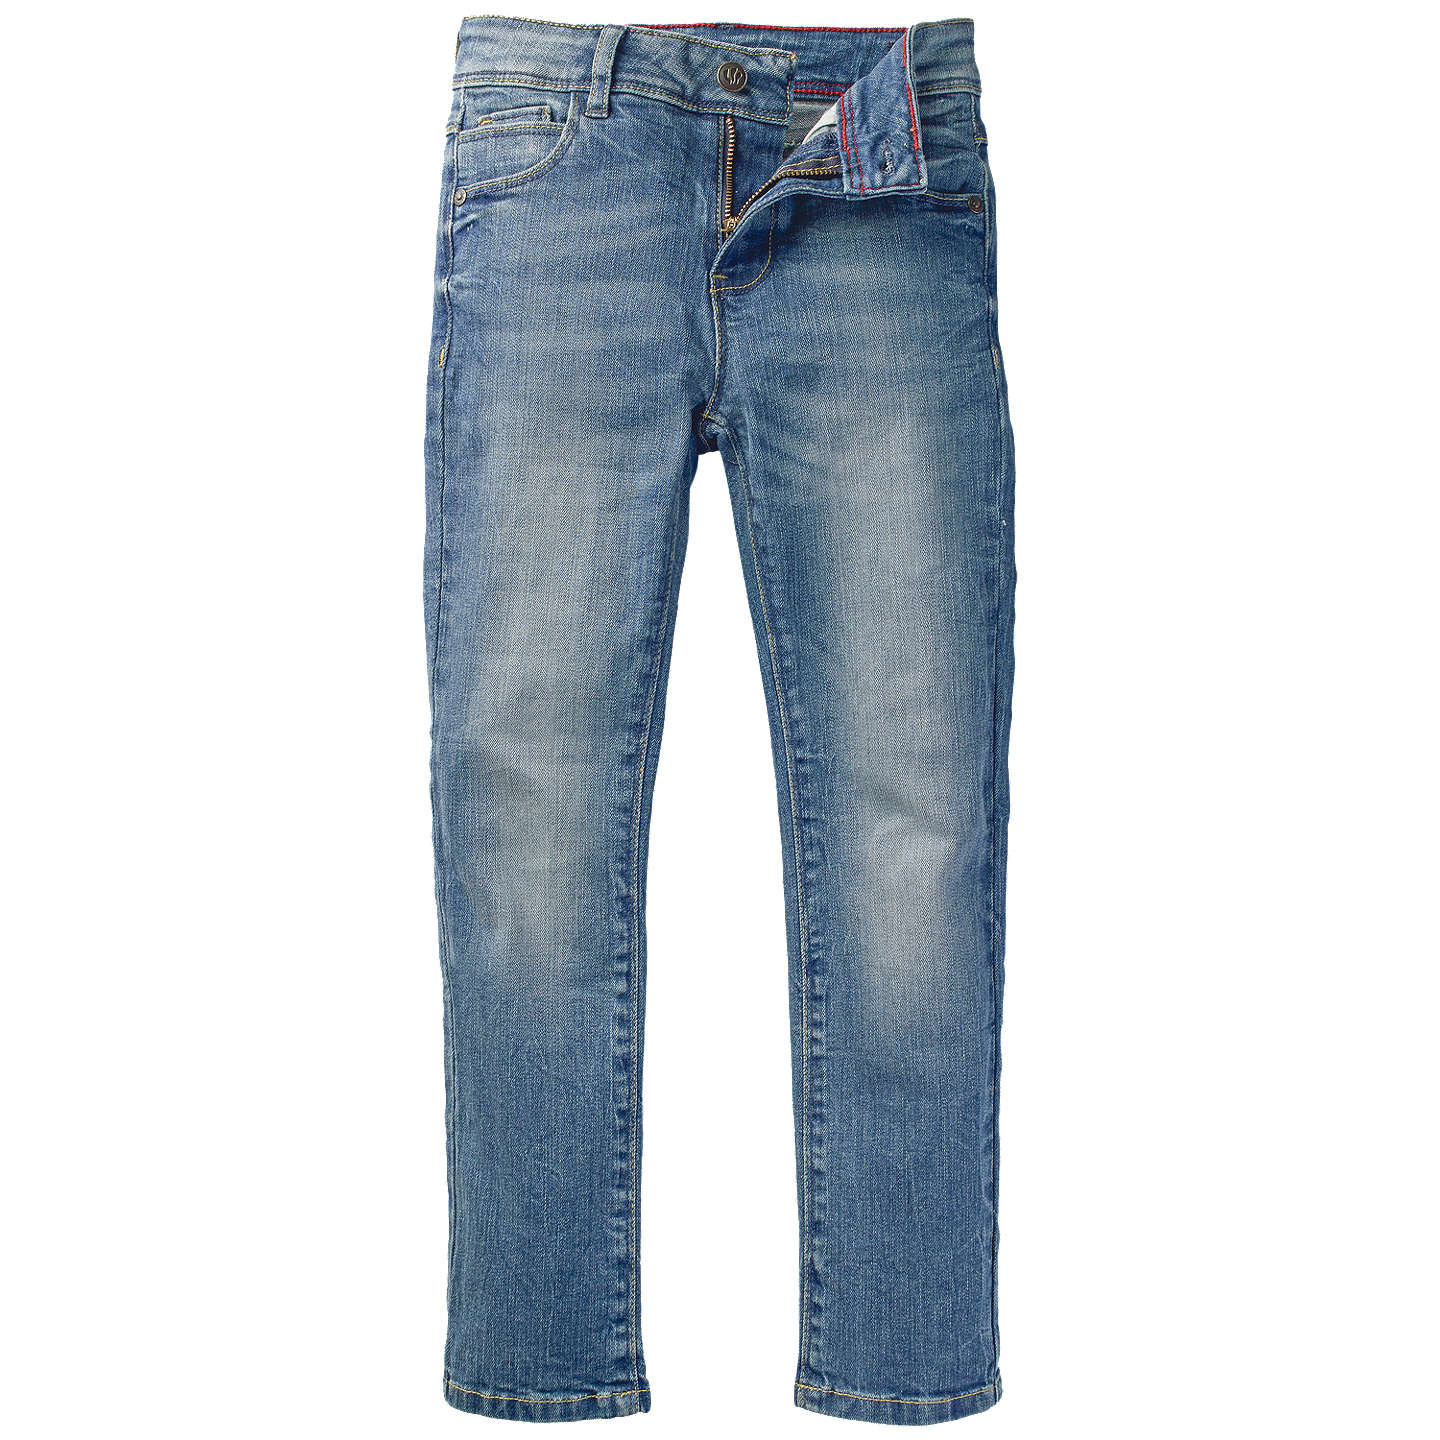 Fat Face Boys' Slim Fit Jeans, Mid Wash at John Lewis